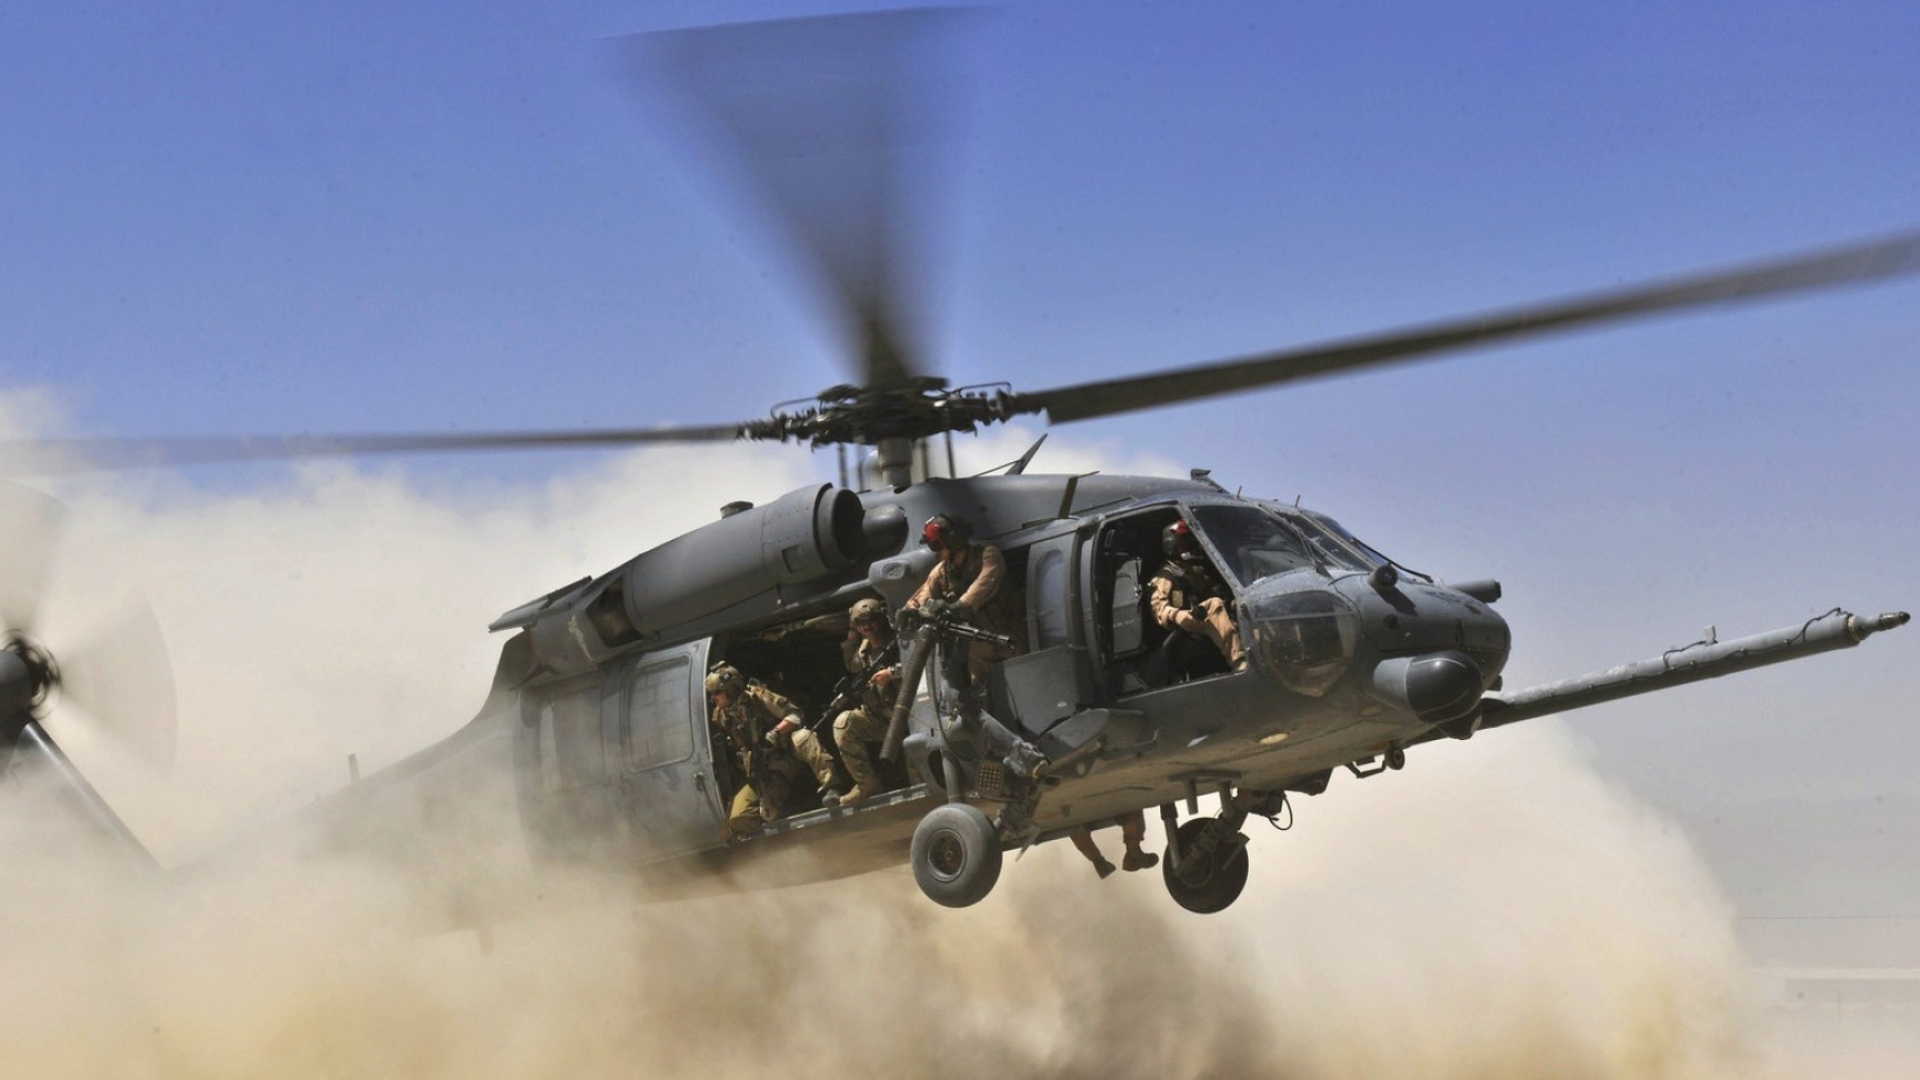 Sikorsky HH-60 Pave Hawk, American attack helicopter, 1920x1080 Full HD Desktop